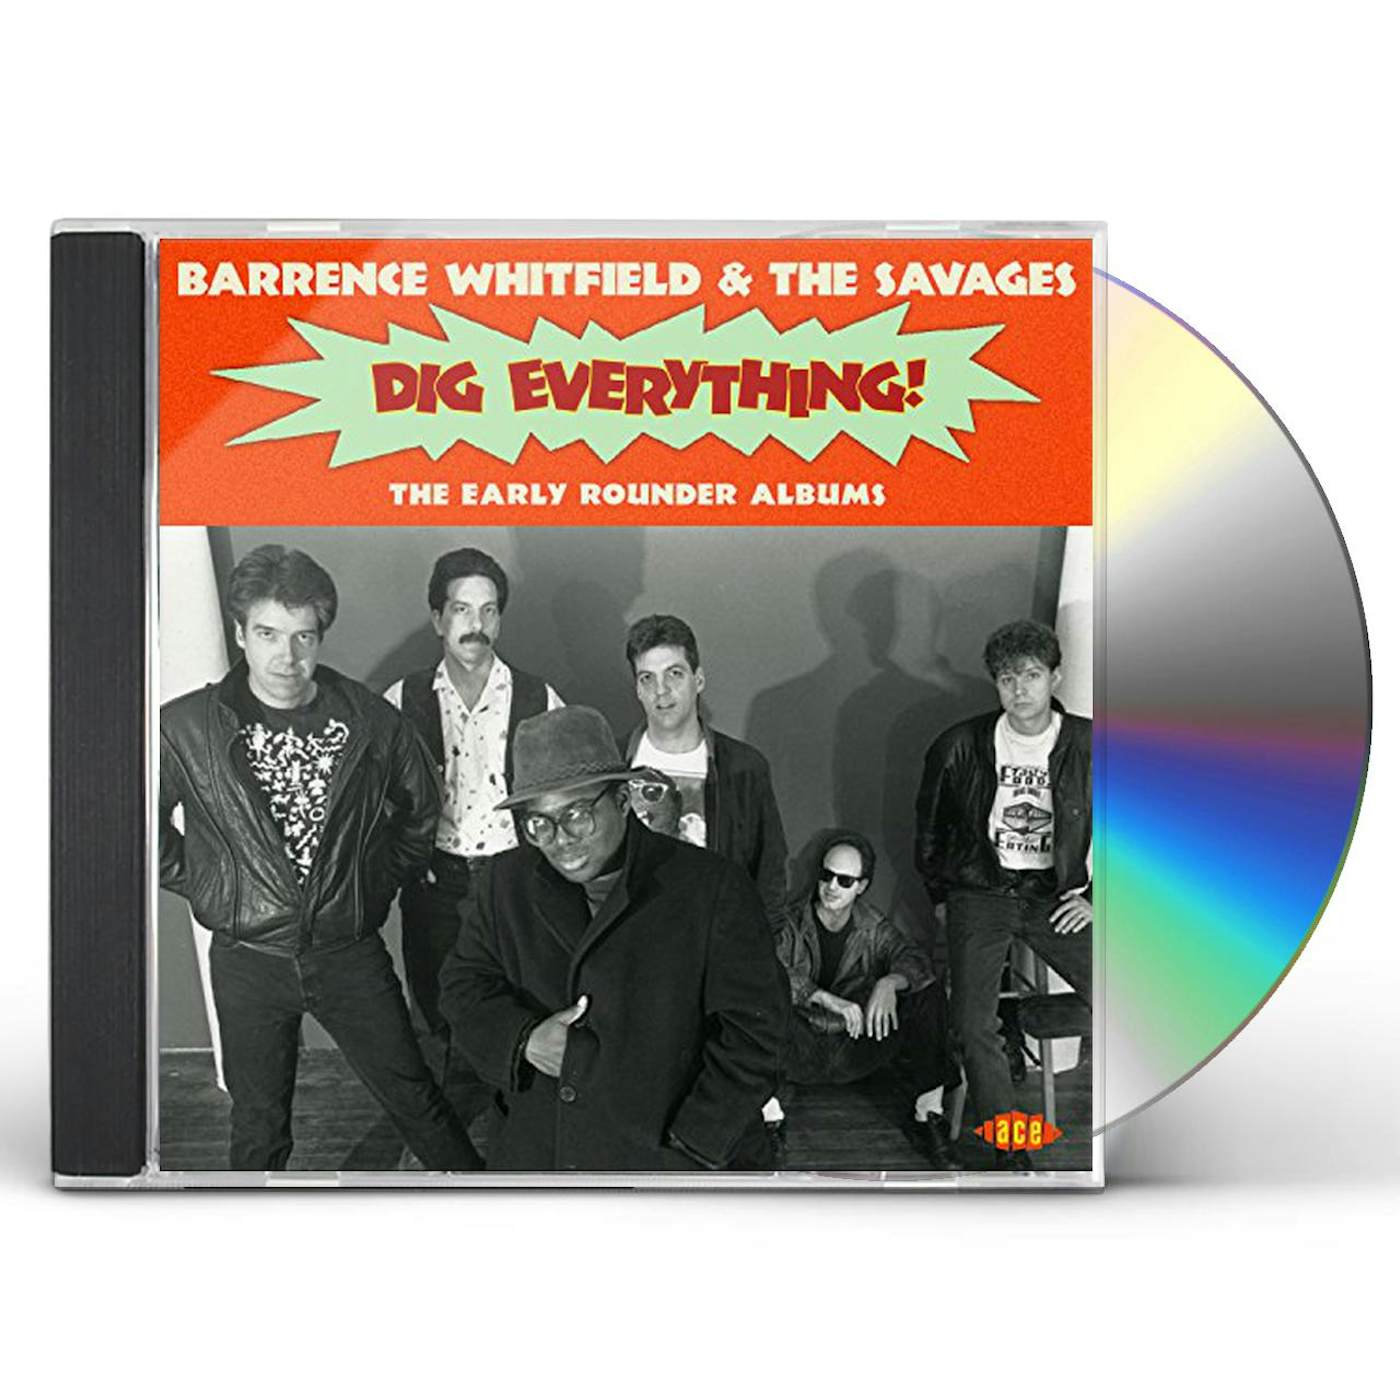 Barrence Whitfield & The Savages DIG EVERYTHING: THE EARLY ROUNDER ALBUMS CD